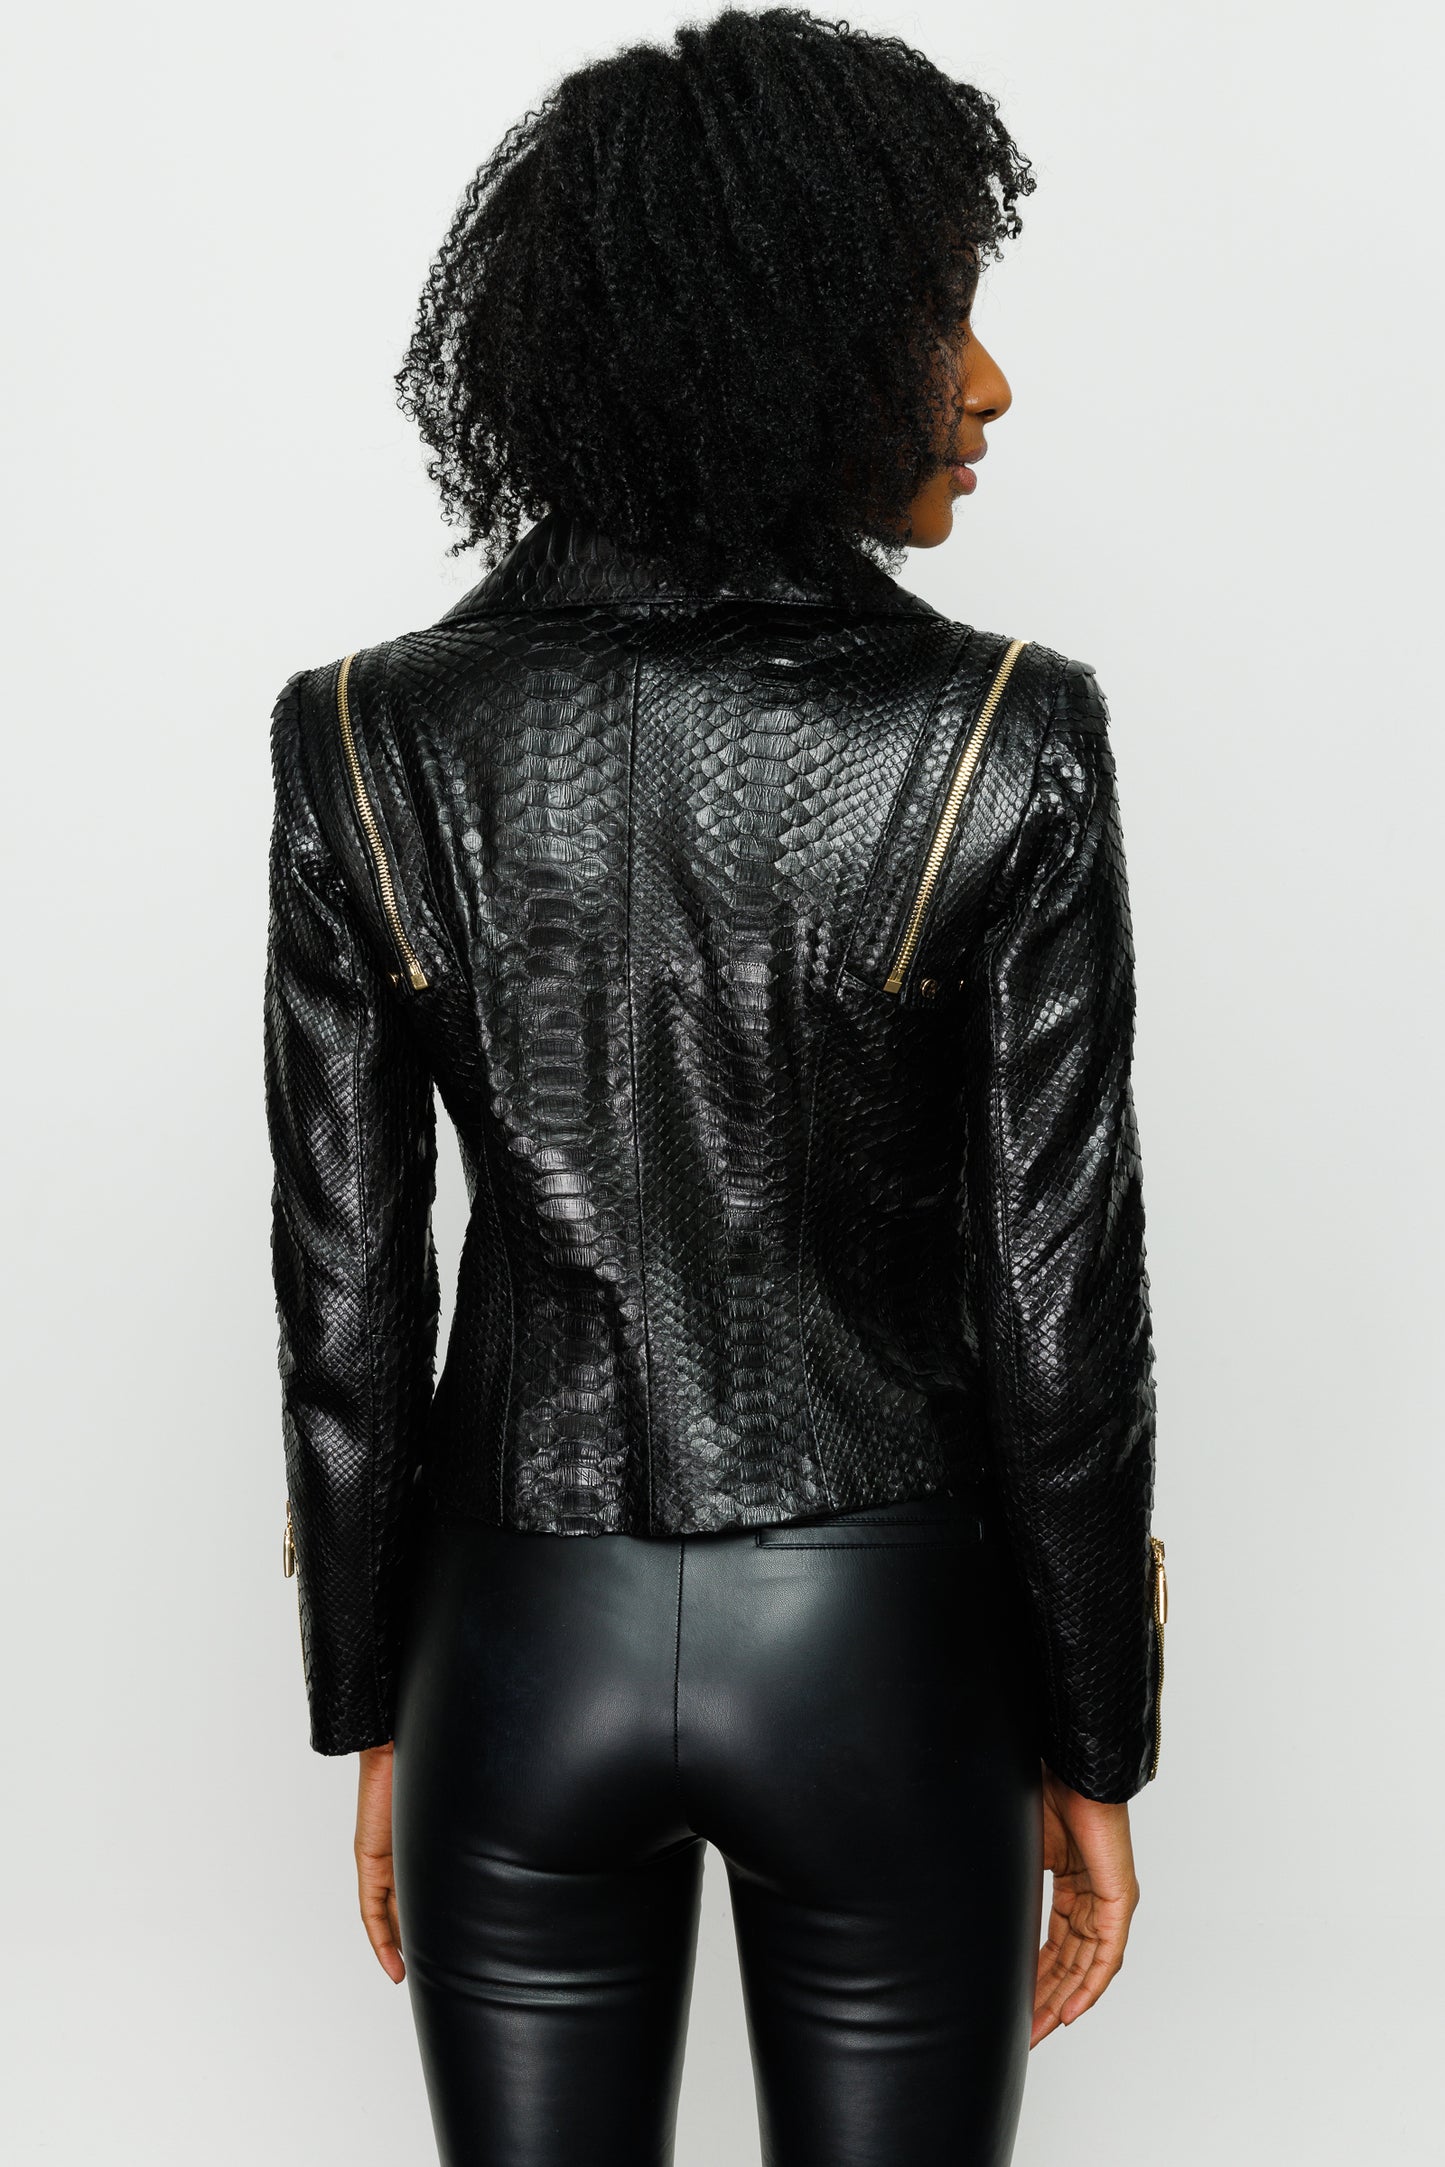 The Queen Pythn Skin Black Leather Jacket